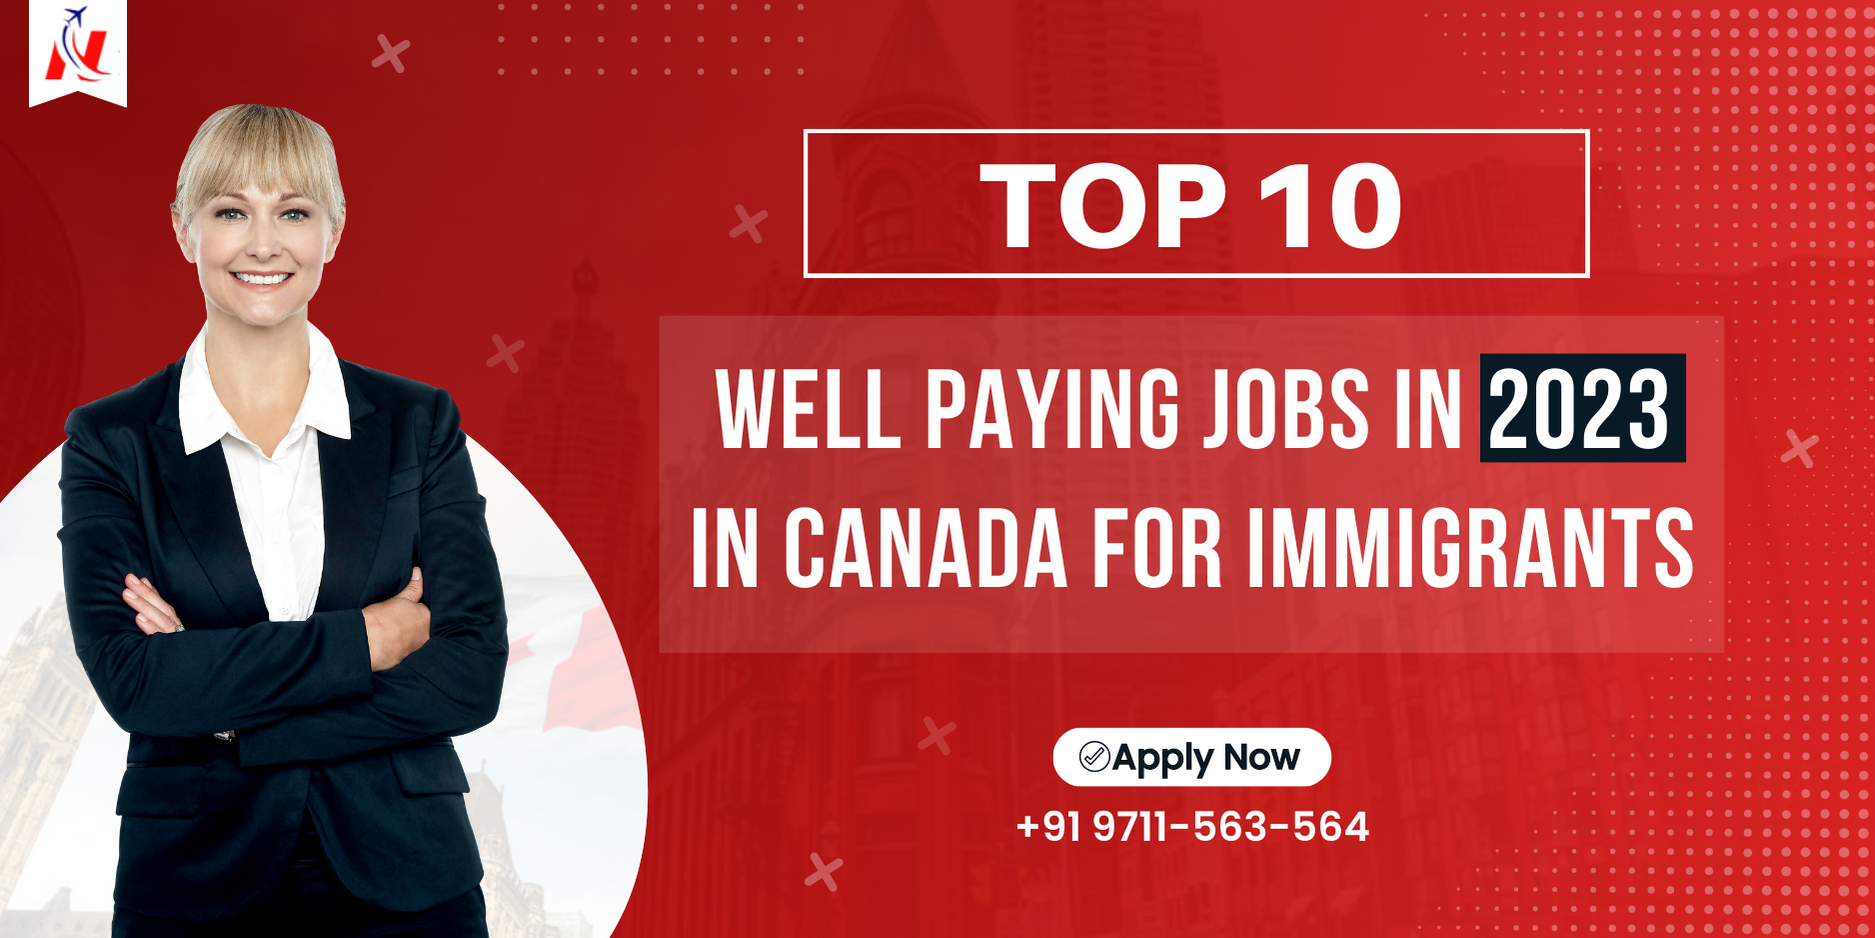 Top 10 Well-Paying Jobs in 2023 in Canada for Immigrants